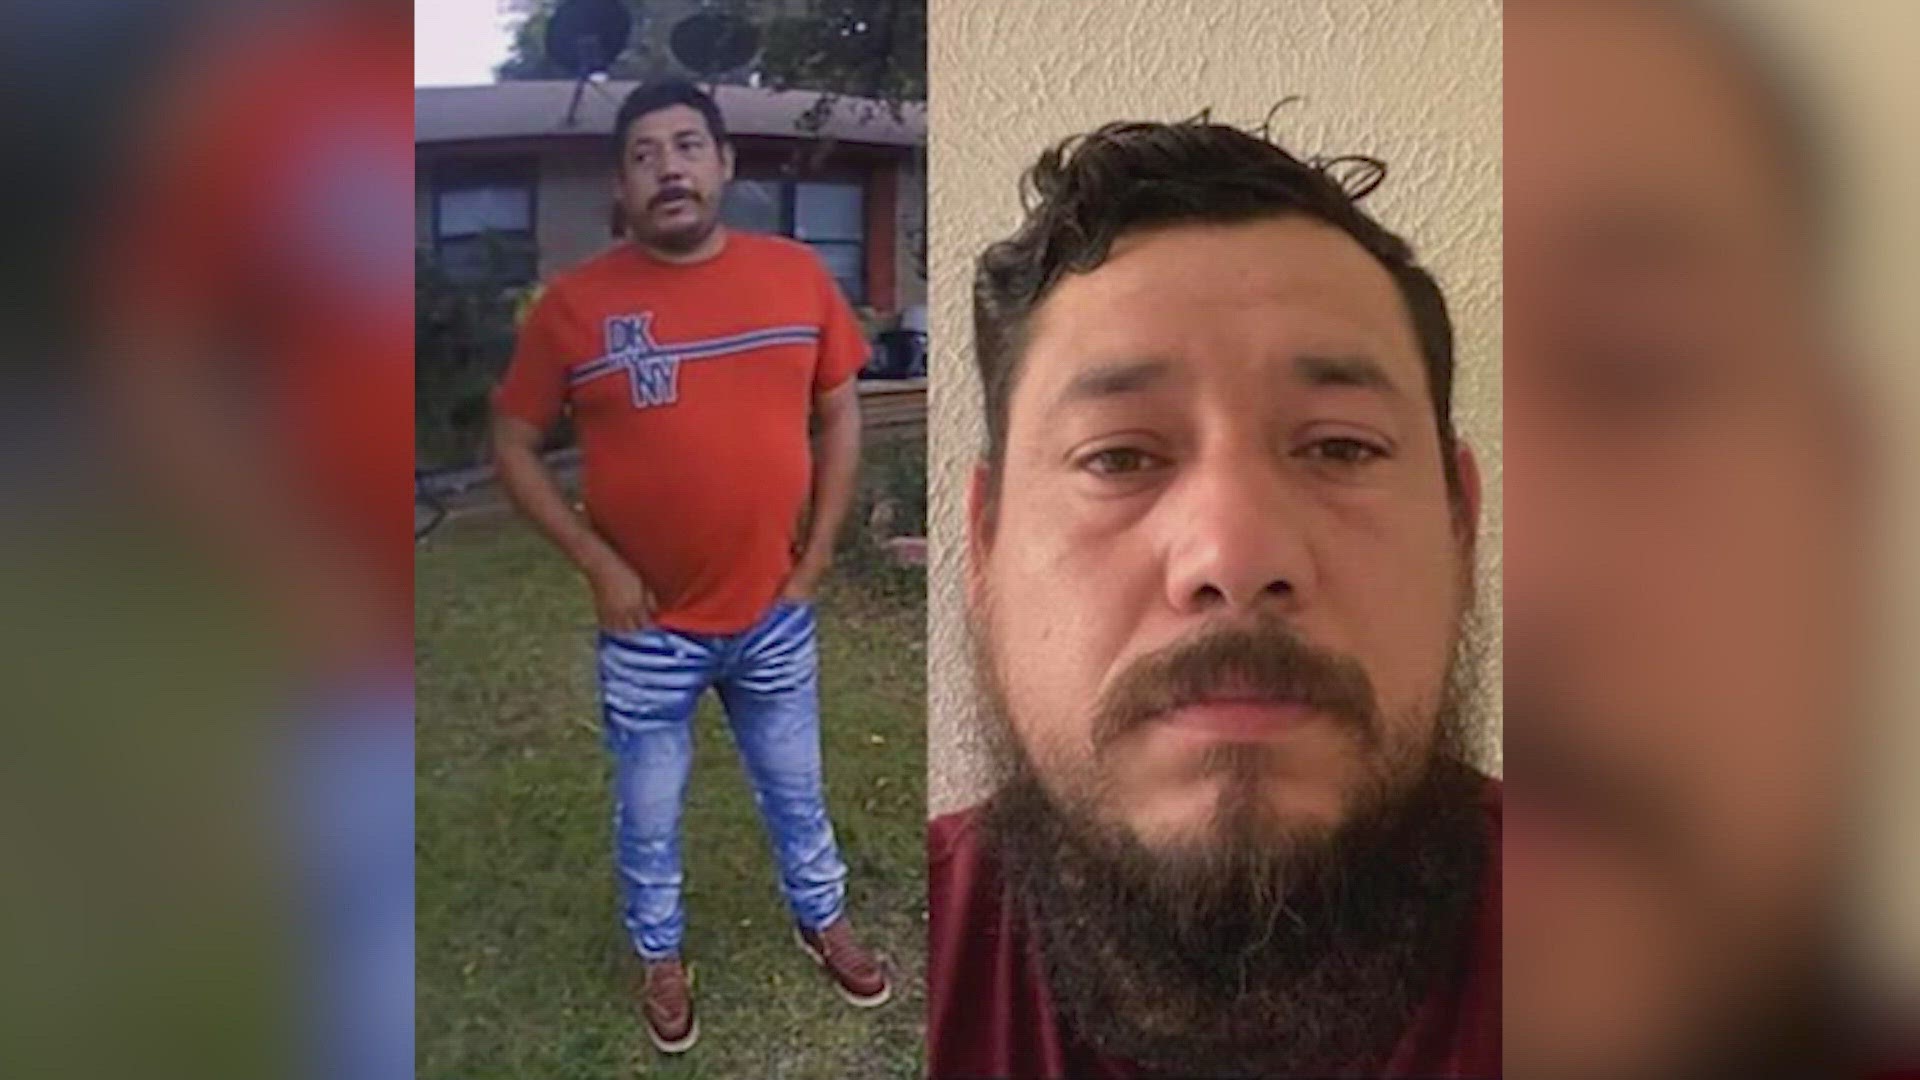 The suspect has been identified as Luis Pardo. Police say the incident happened on Nov. 21 at their home on Erich Drive.